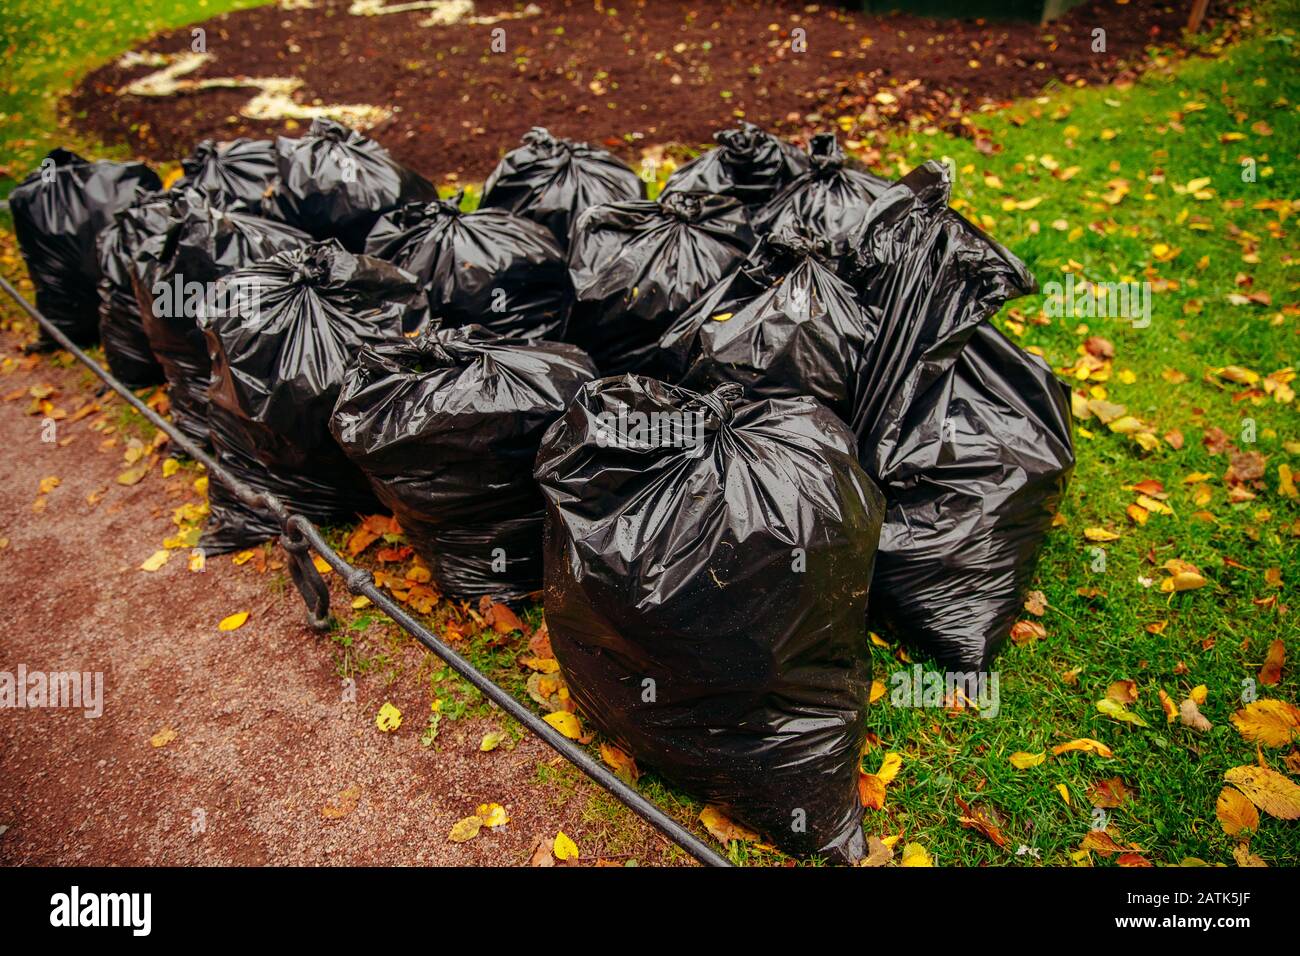 https://c8.alamy.com/comp/2ATK5JF/two-biodegradable-trash-bags-full-of-yellow-leaves-on-green-grass-2ATK5JF.jpg